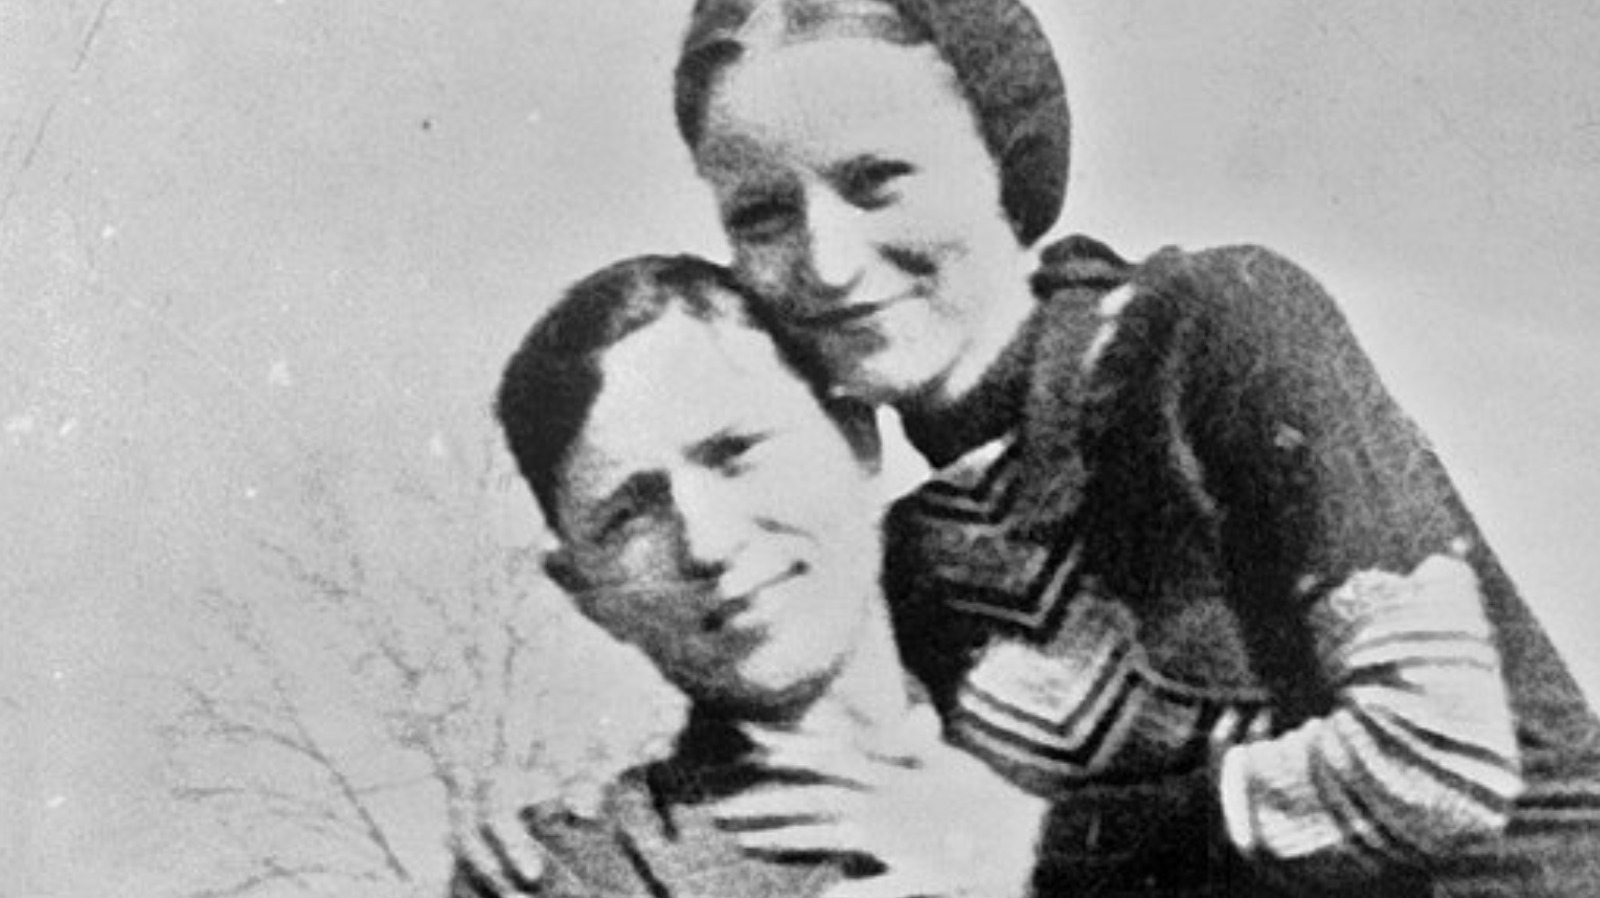 Clyde Barrow Committed A Brutal Murder While In Prison